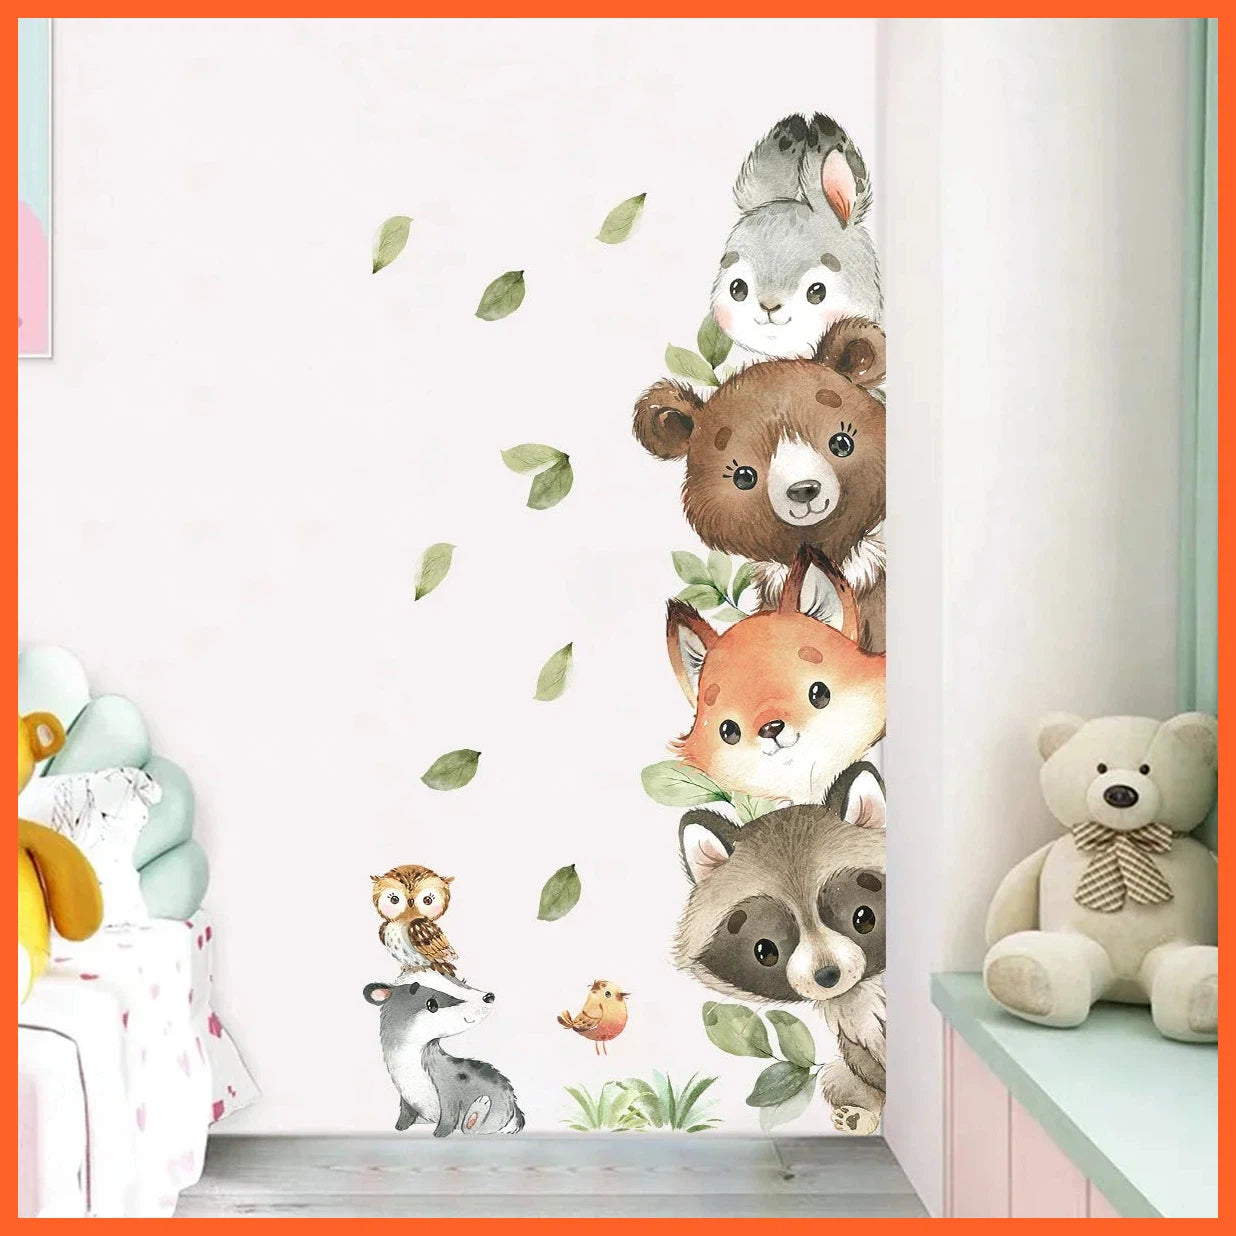 1Pc Cute Cartoon Probe Stacked Sitting Small Animal Wall Stickers For Kids Room Bedroom Home Decoration Wall Decor